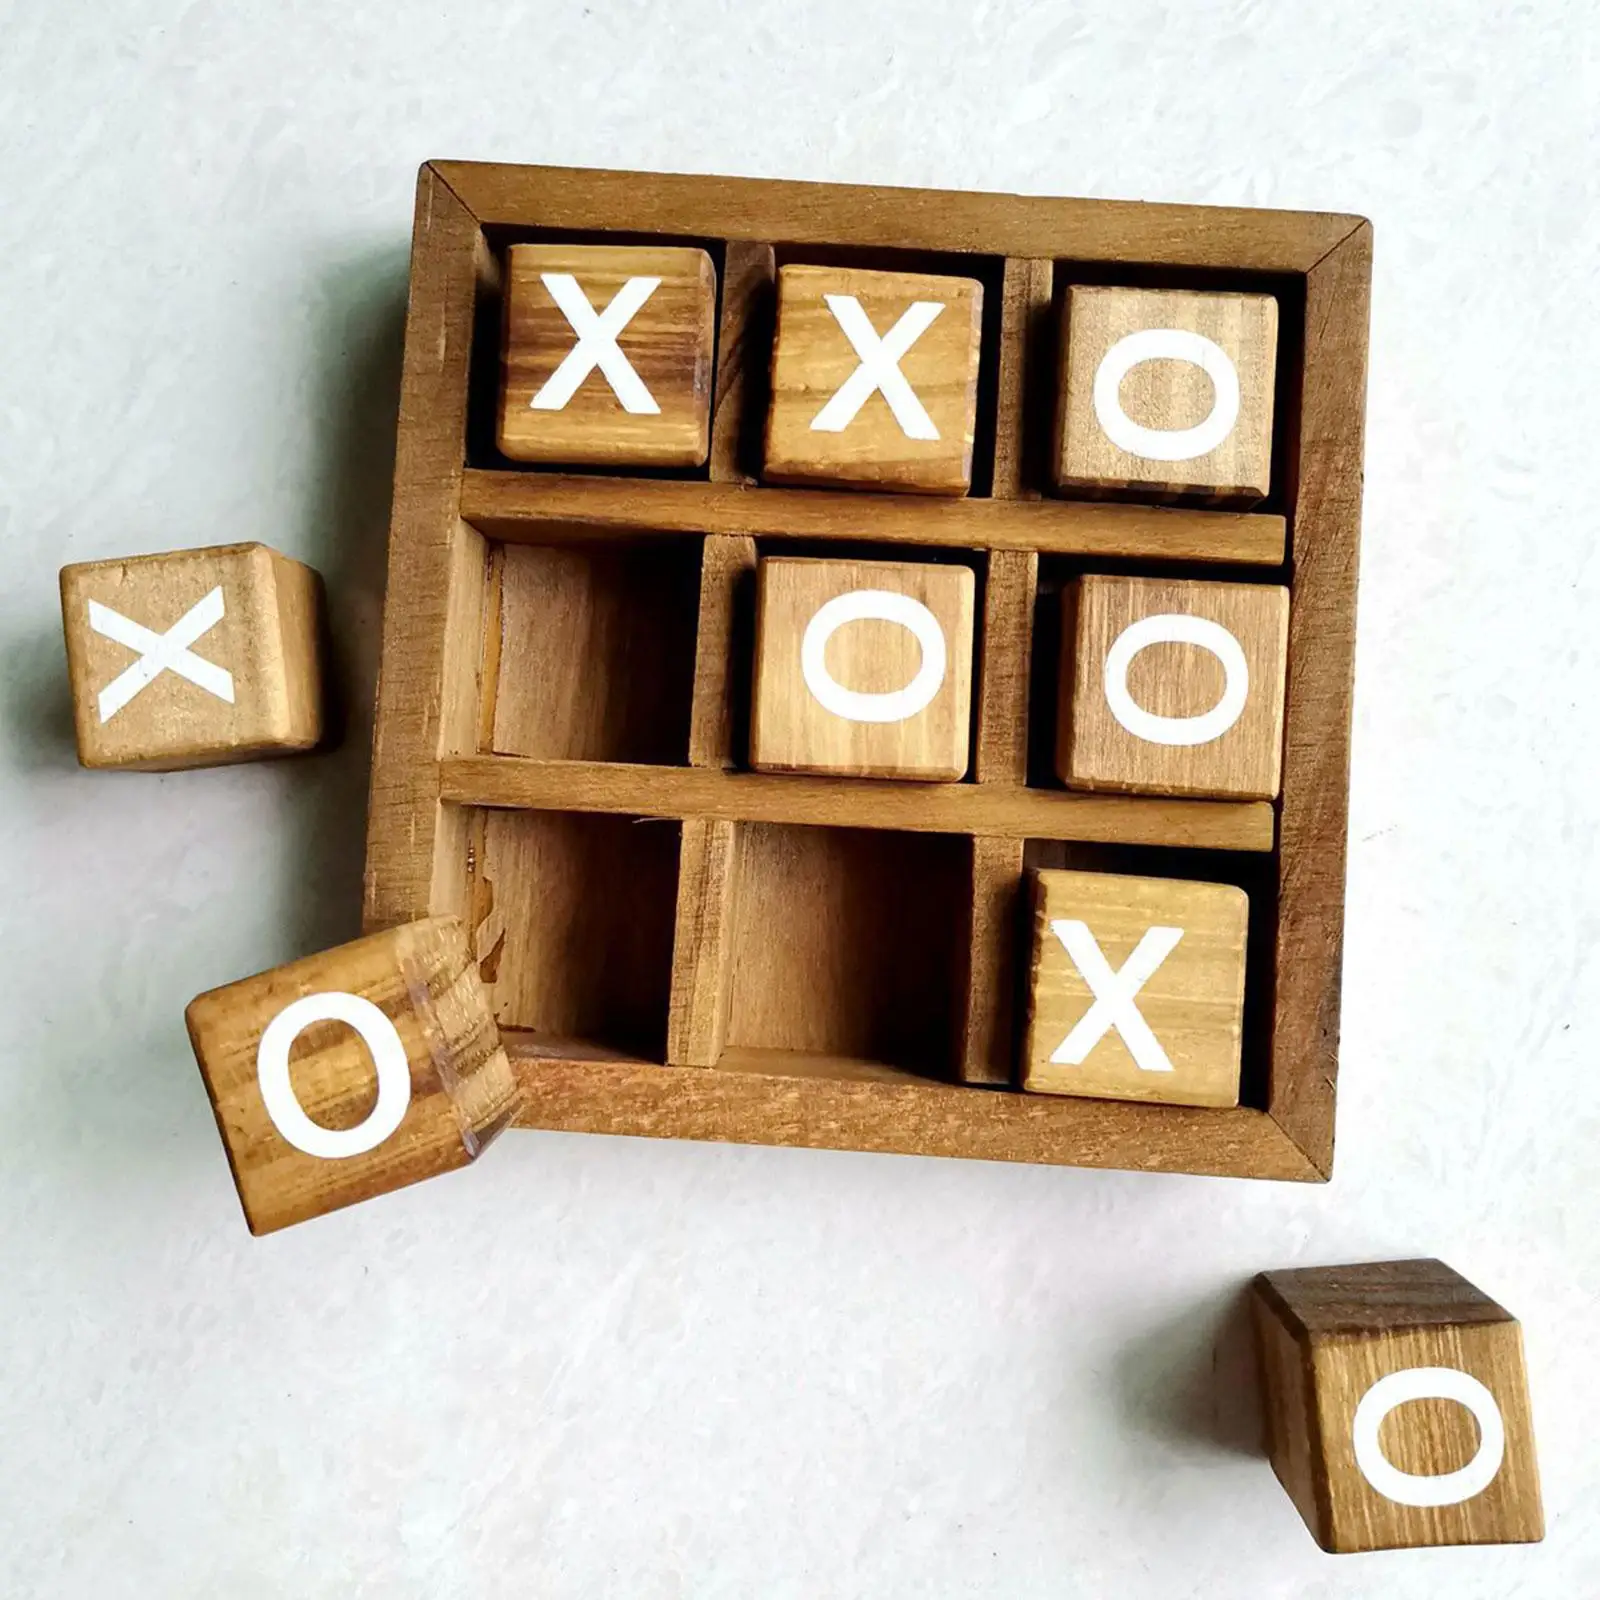 Tic TAC Toe Game Strategy Board Games Fun Indoor Brain Teaser for Living Room Family